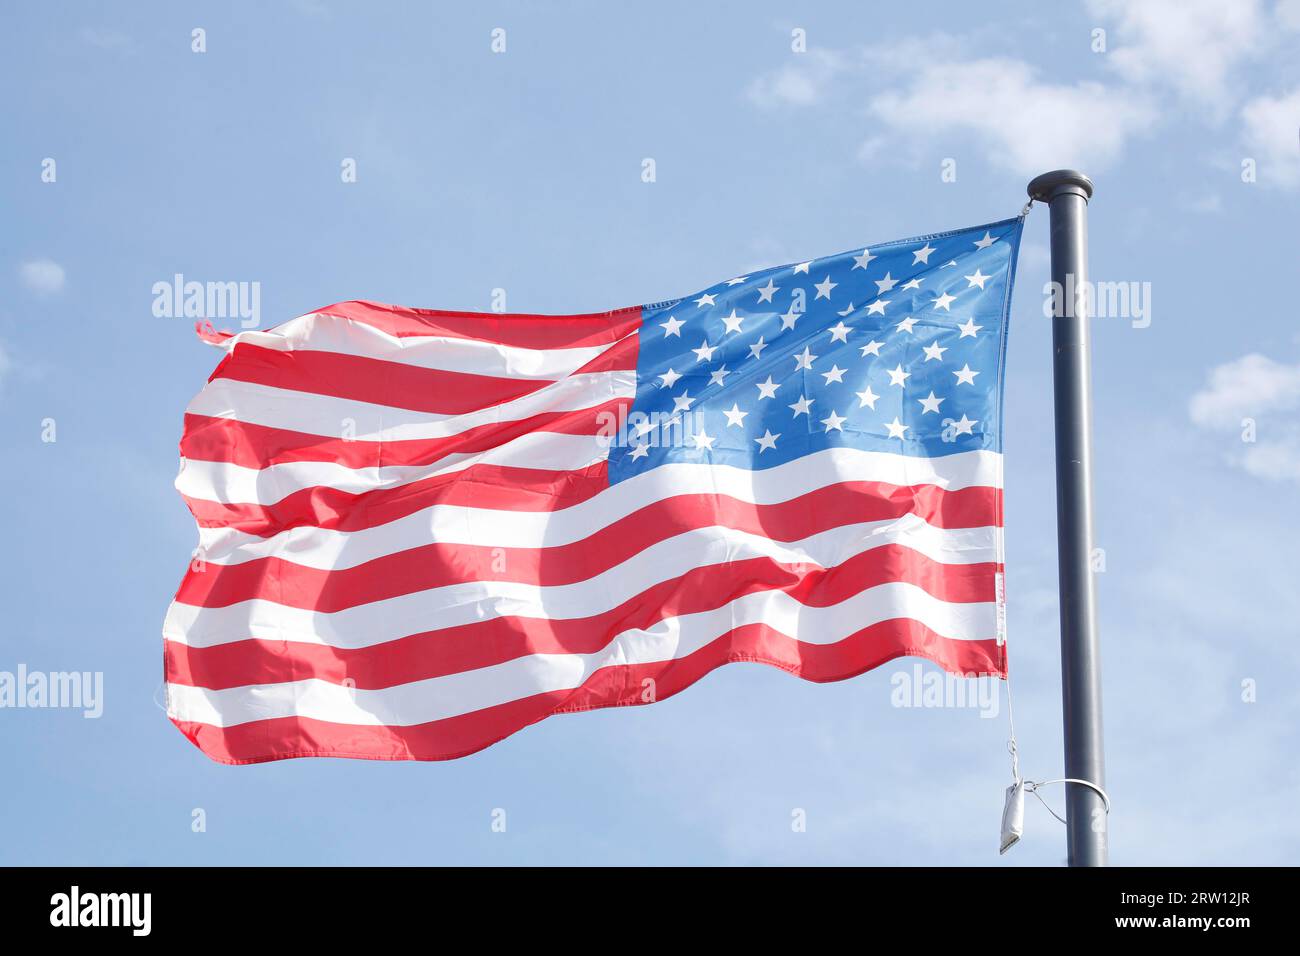 Flag of the USA waving in the wind, Blue sky, Germany Stock Photo